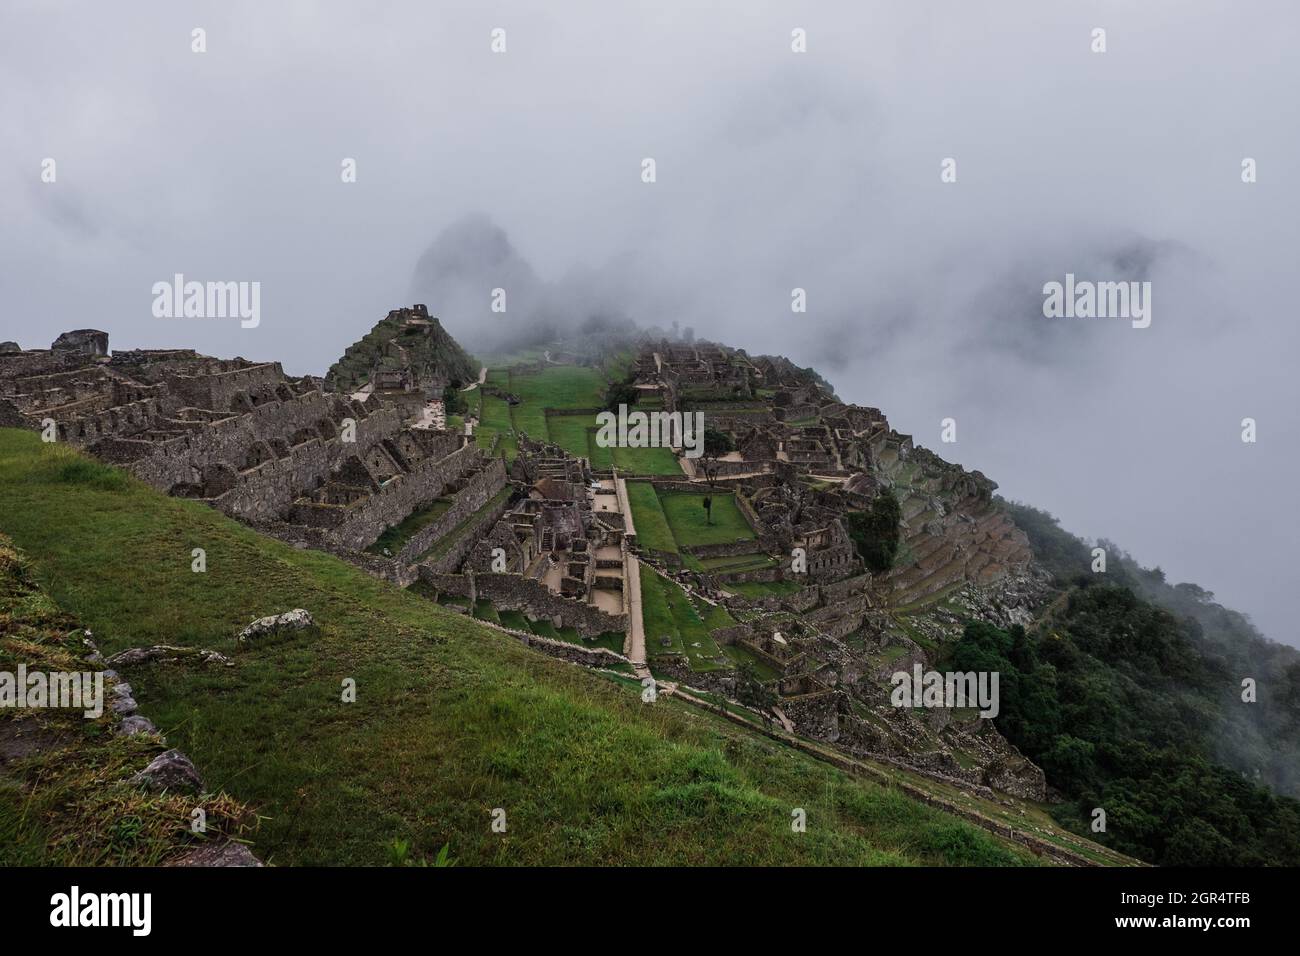 View Towards Machu Picchu On A Cloudy And Rainy Day Stock Photo